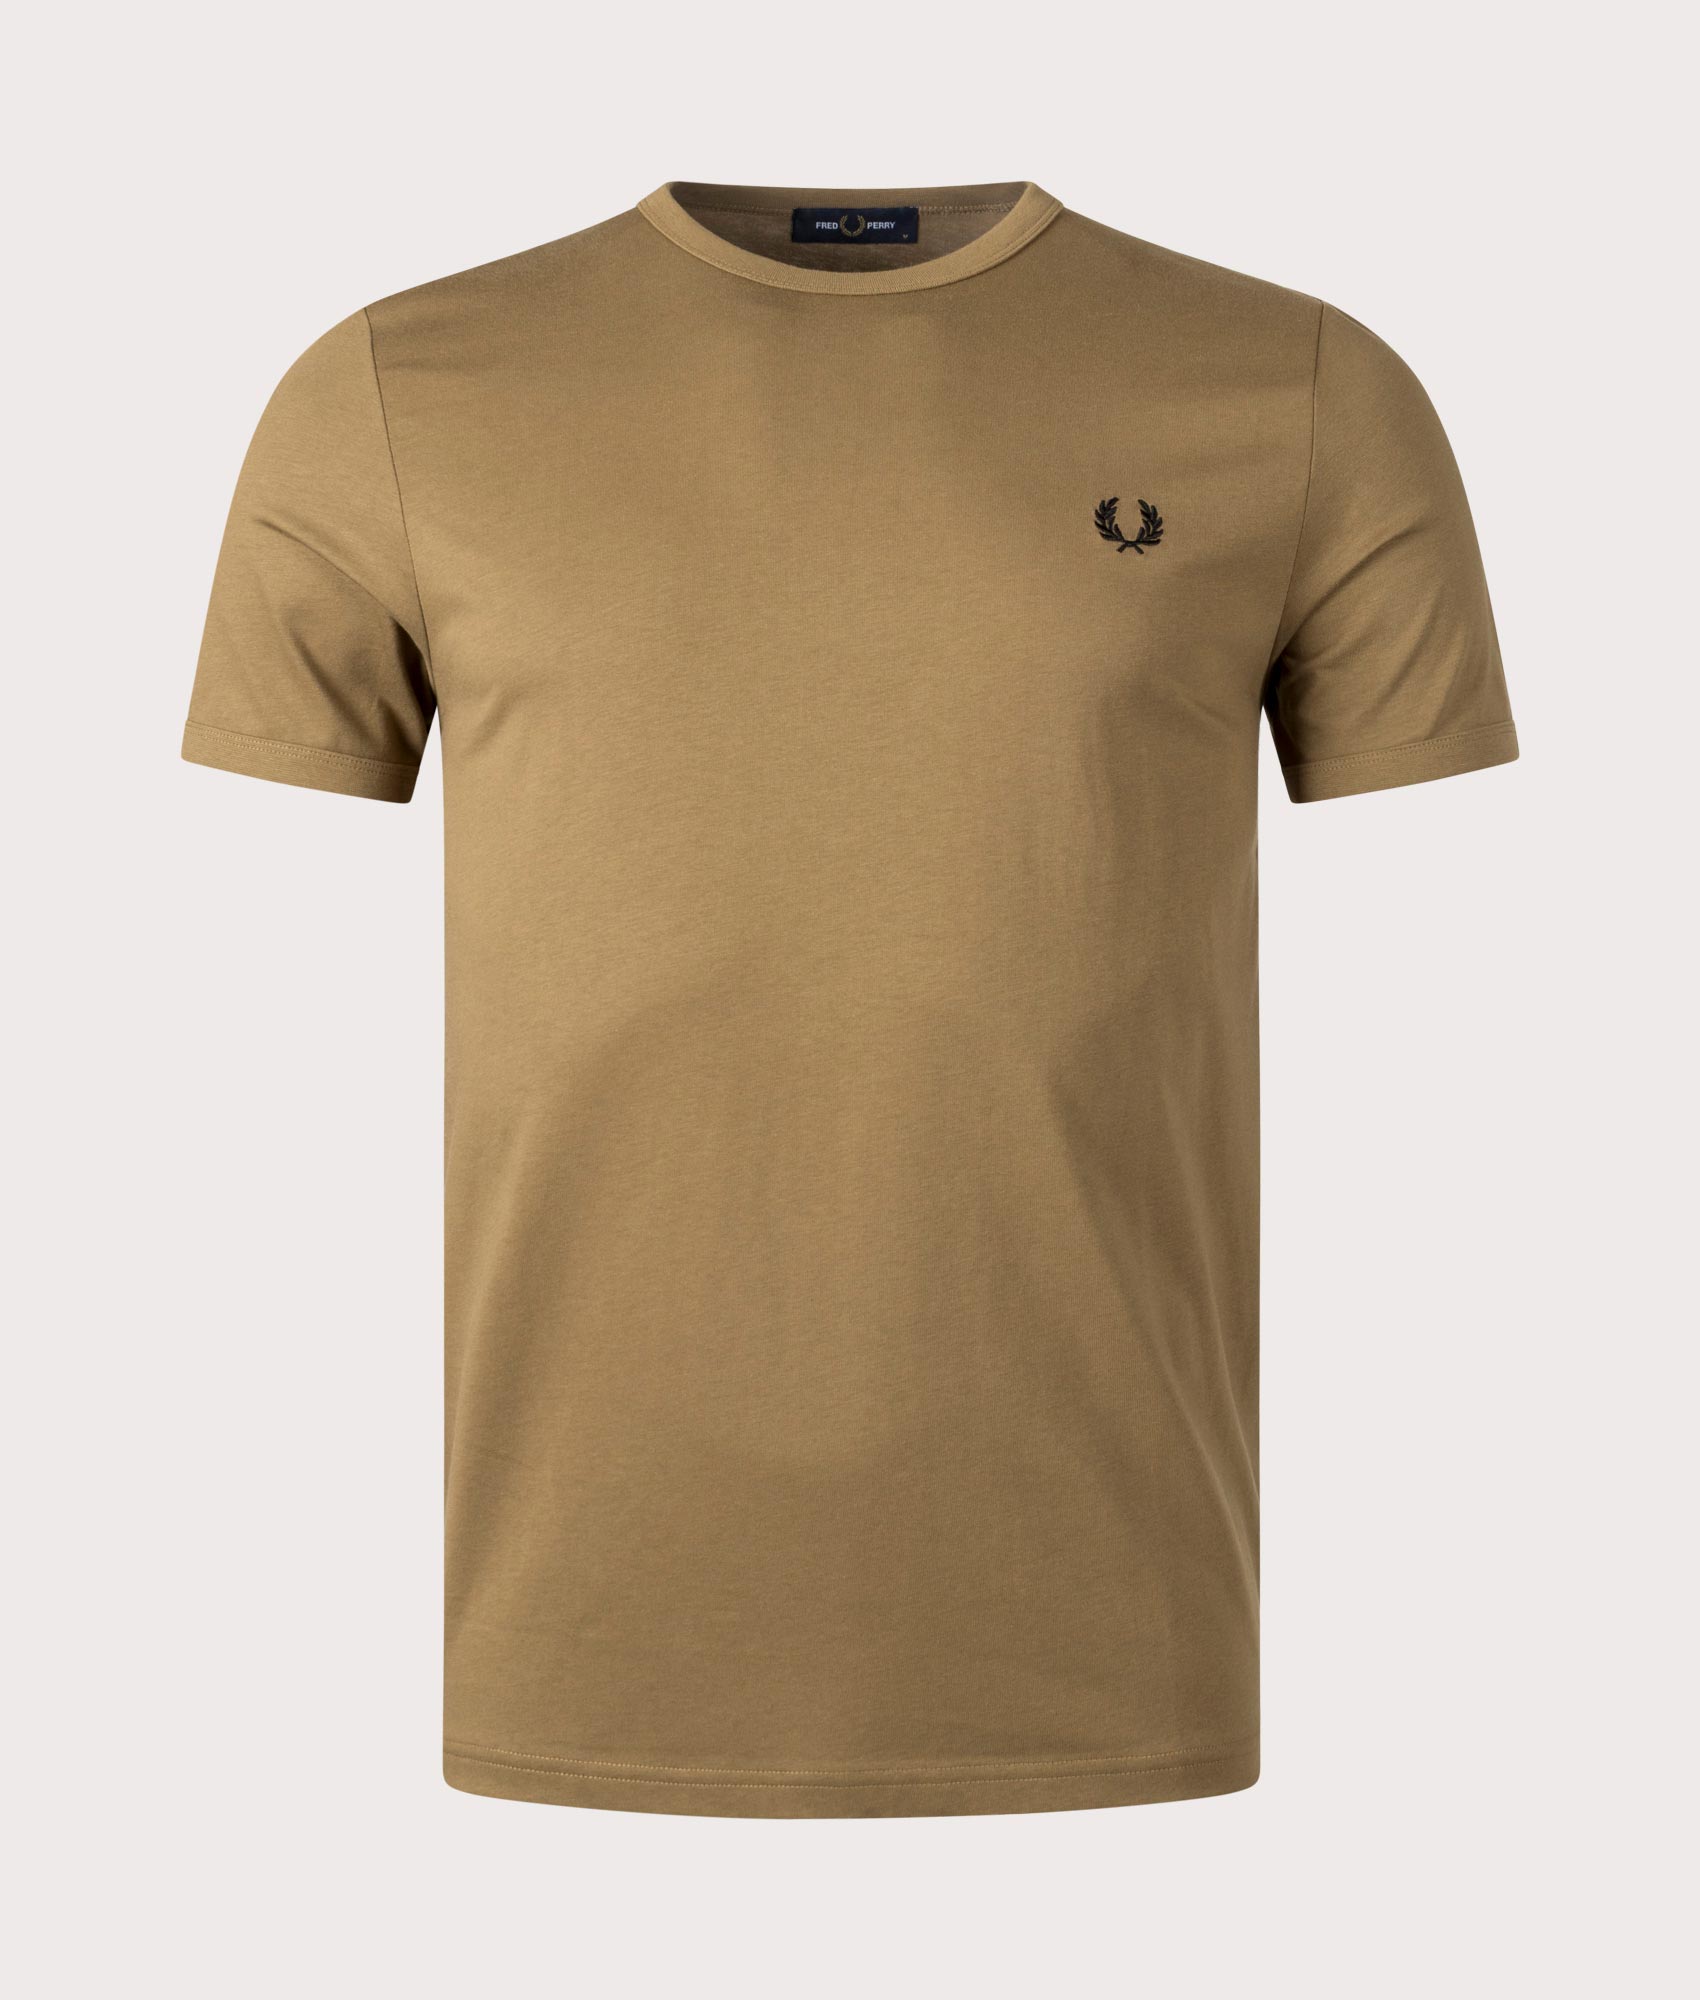 Fred Perry Mens Ringer T-Shirt - Colour: R60 Shaded Stone - Size: Large